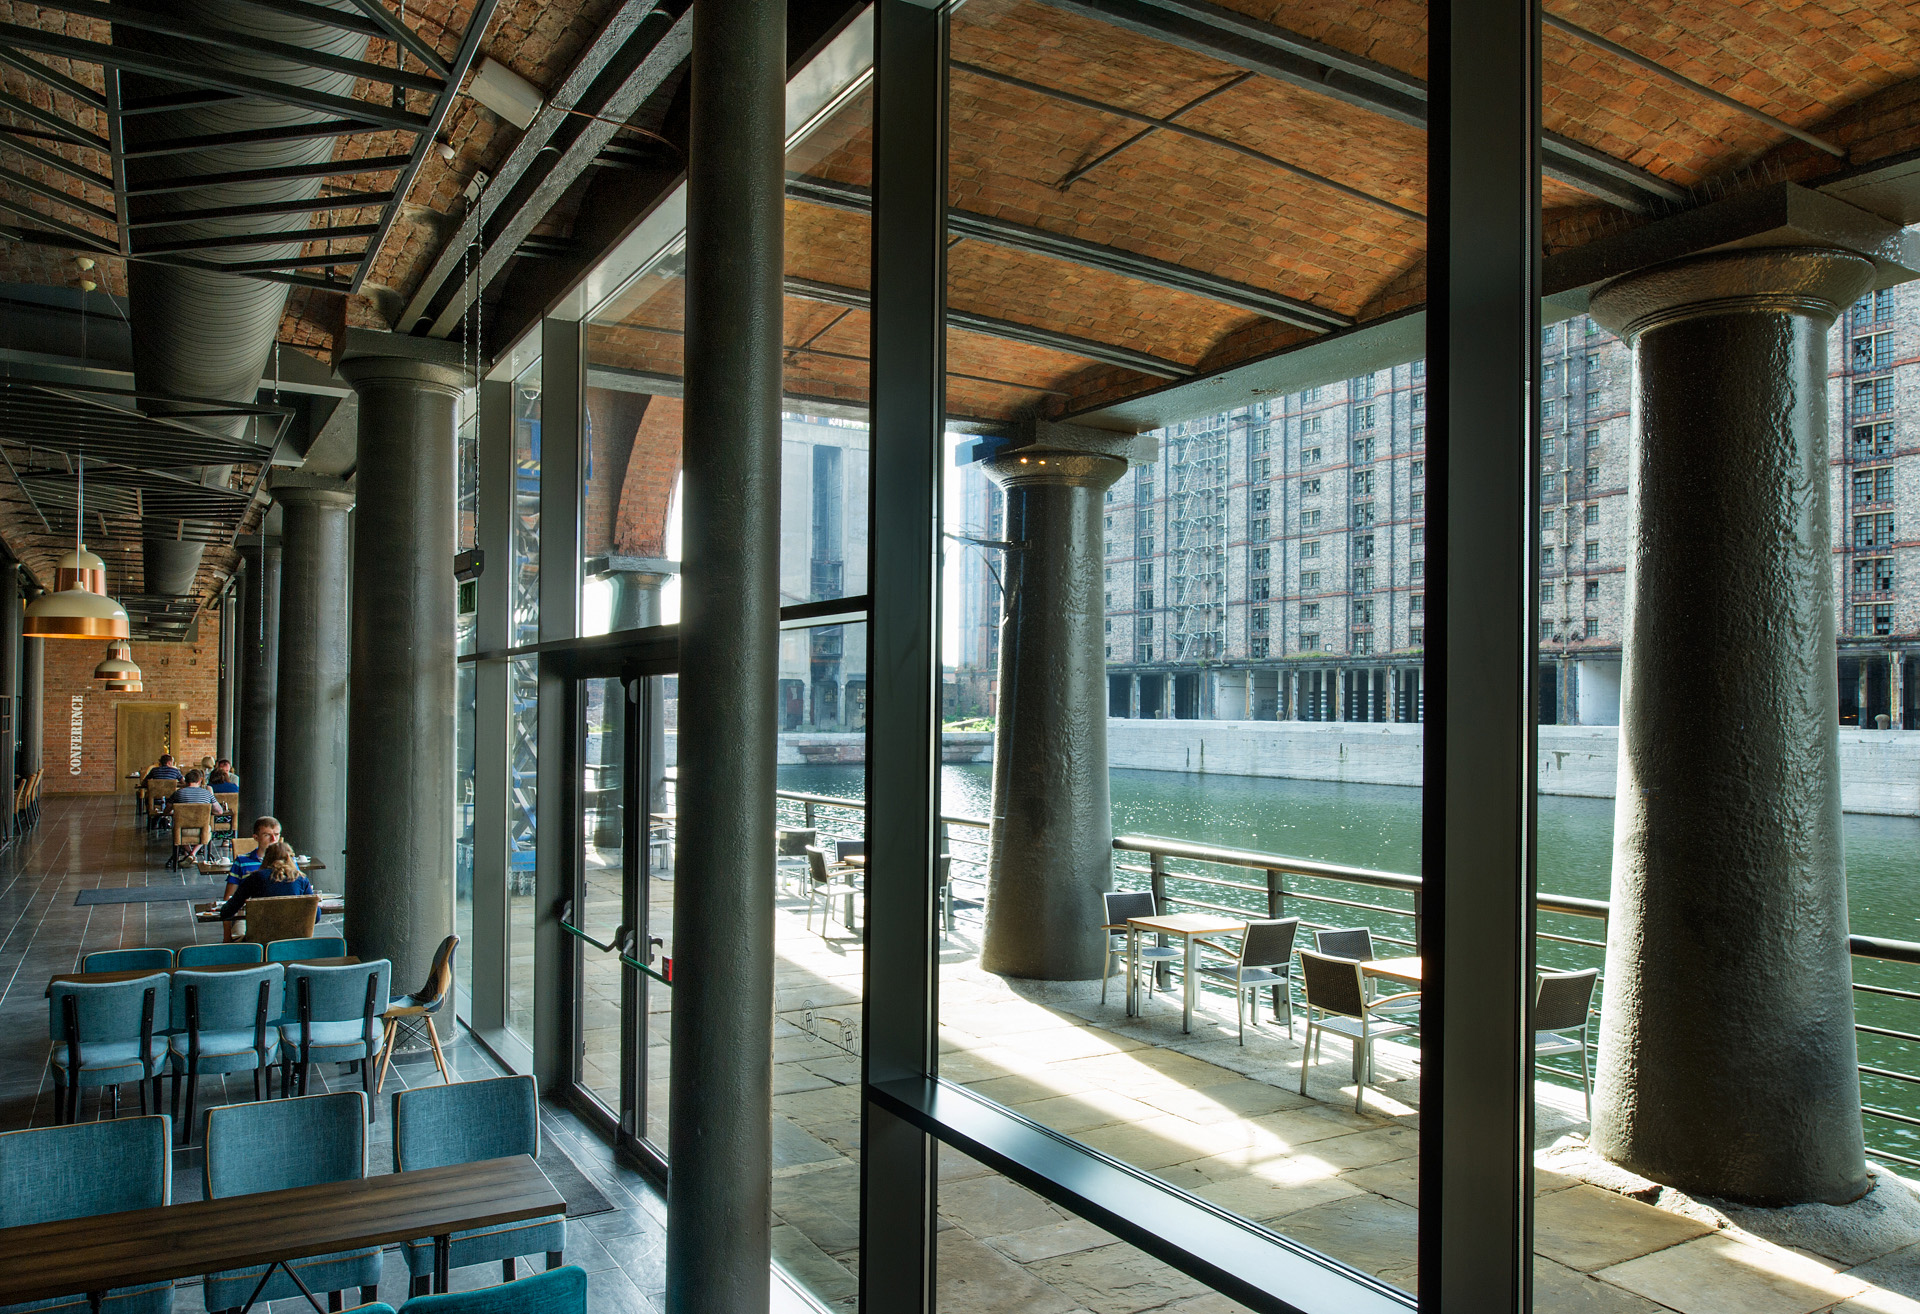 View of a cafe interior and across the dock to other buildings.